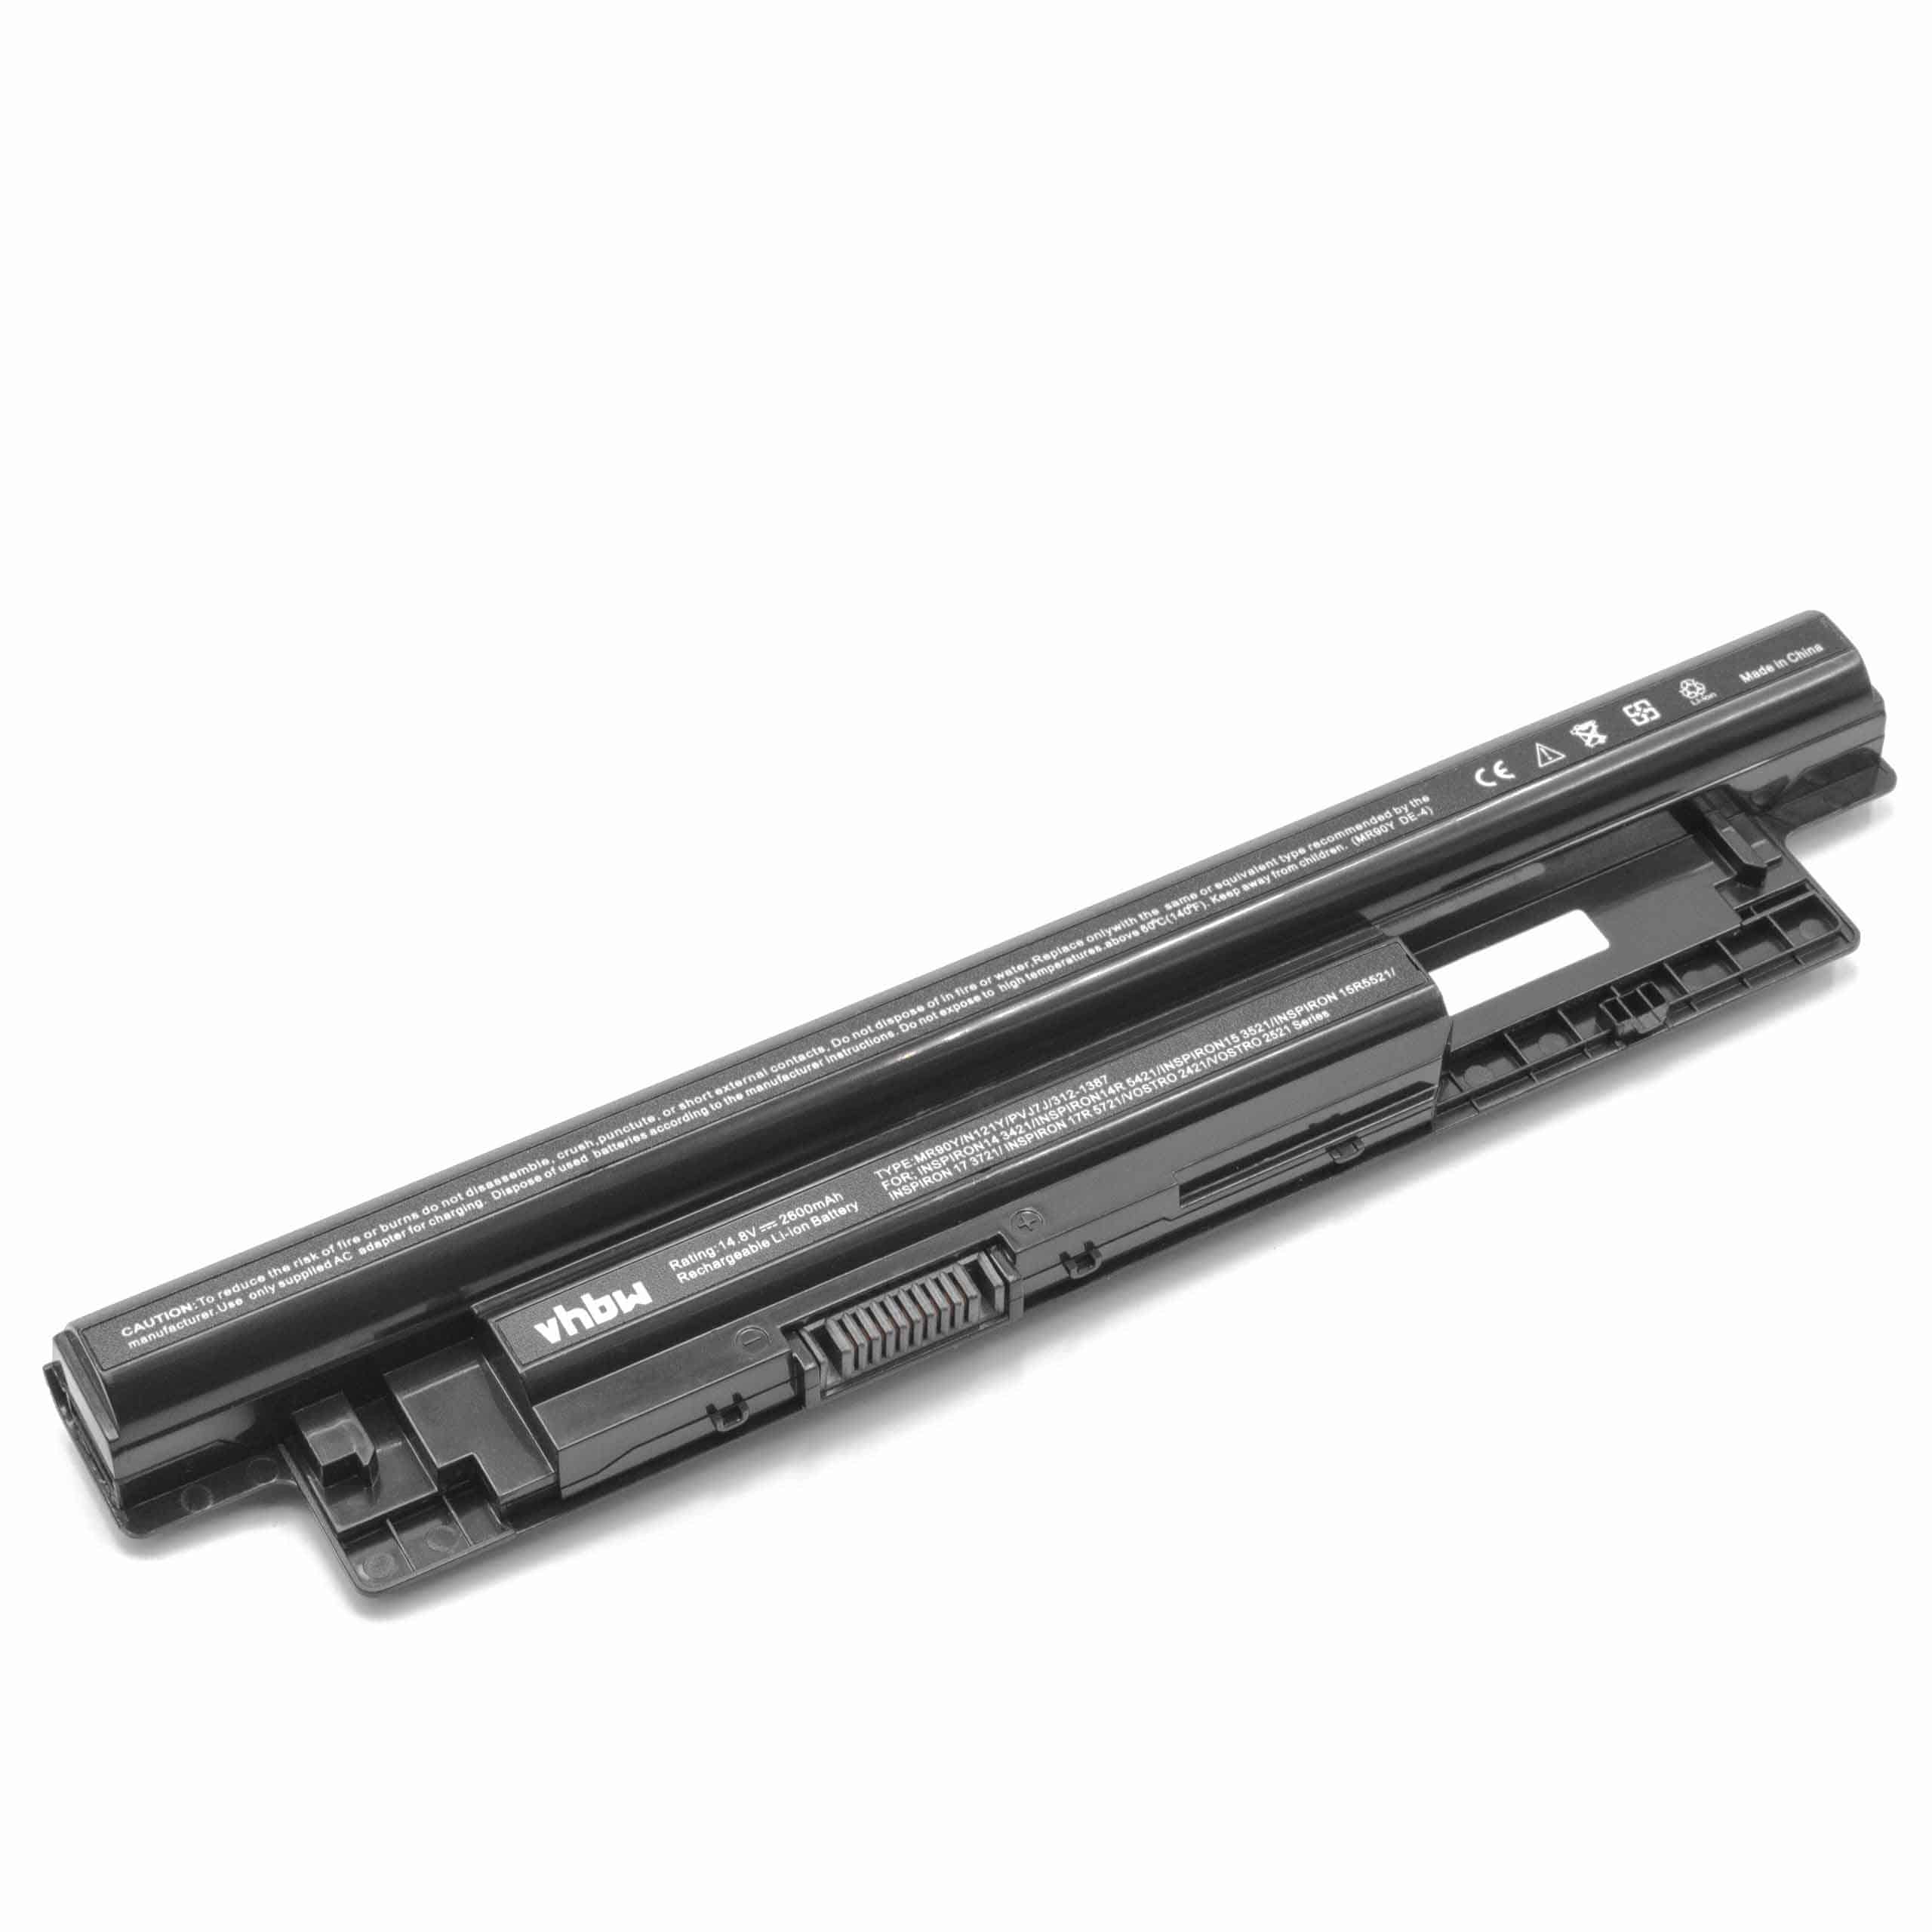 Notebook Battery Replacement for Dell 312-1387, 24DRM, 0MF69, 312-1392, 312-1390 - 2600mAh 14.8V Li-Ion, black